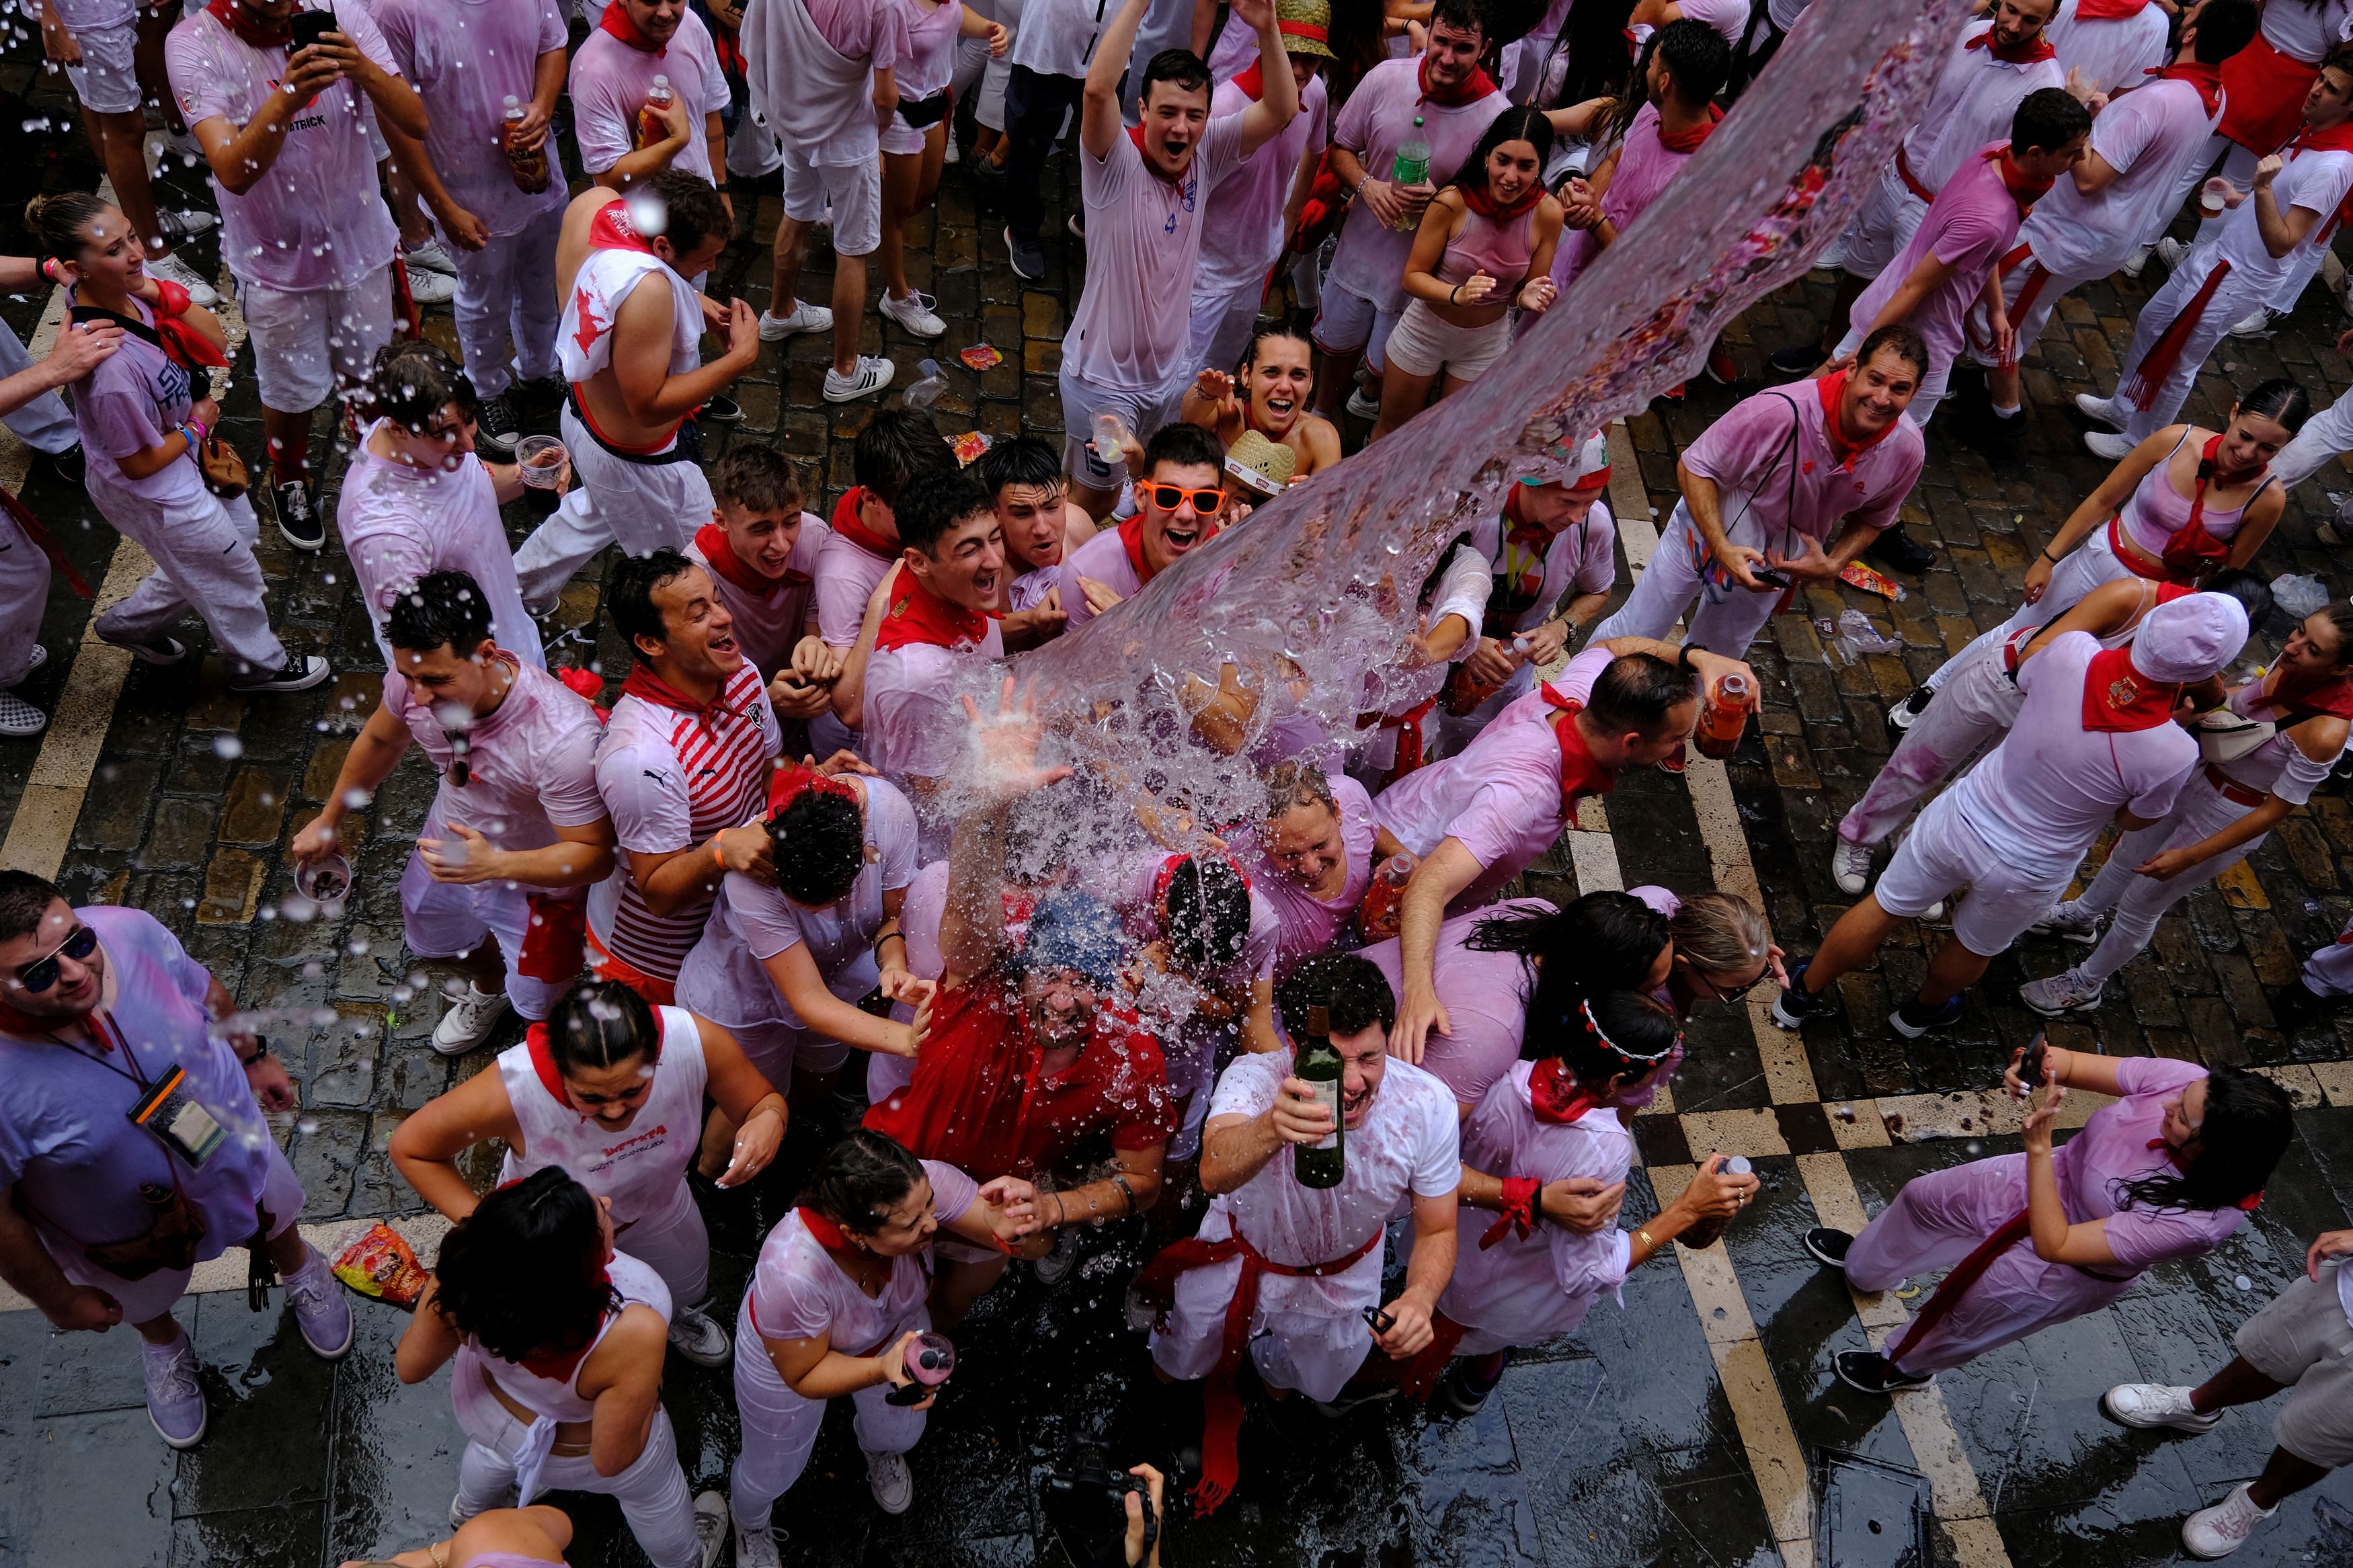 <div class="paragraphs"><p>Revellers are showered in water from the balcony of Cheryl Mountcastle, 69, who has been attending Sanfermines from the U.S. for the past 24 years, after the opening of Sanfermines in Pamplona, Spain, July 6, 2023. </p></div>